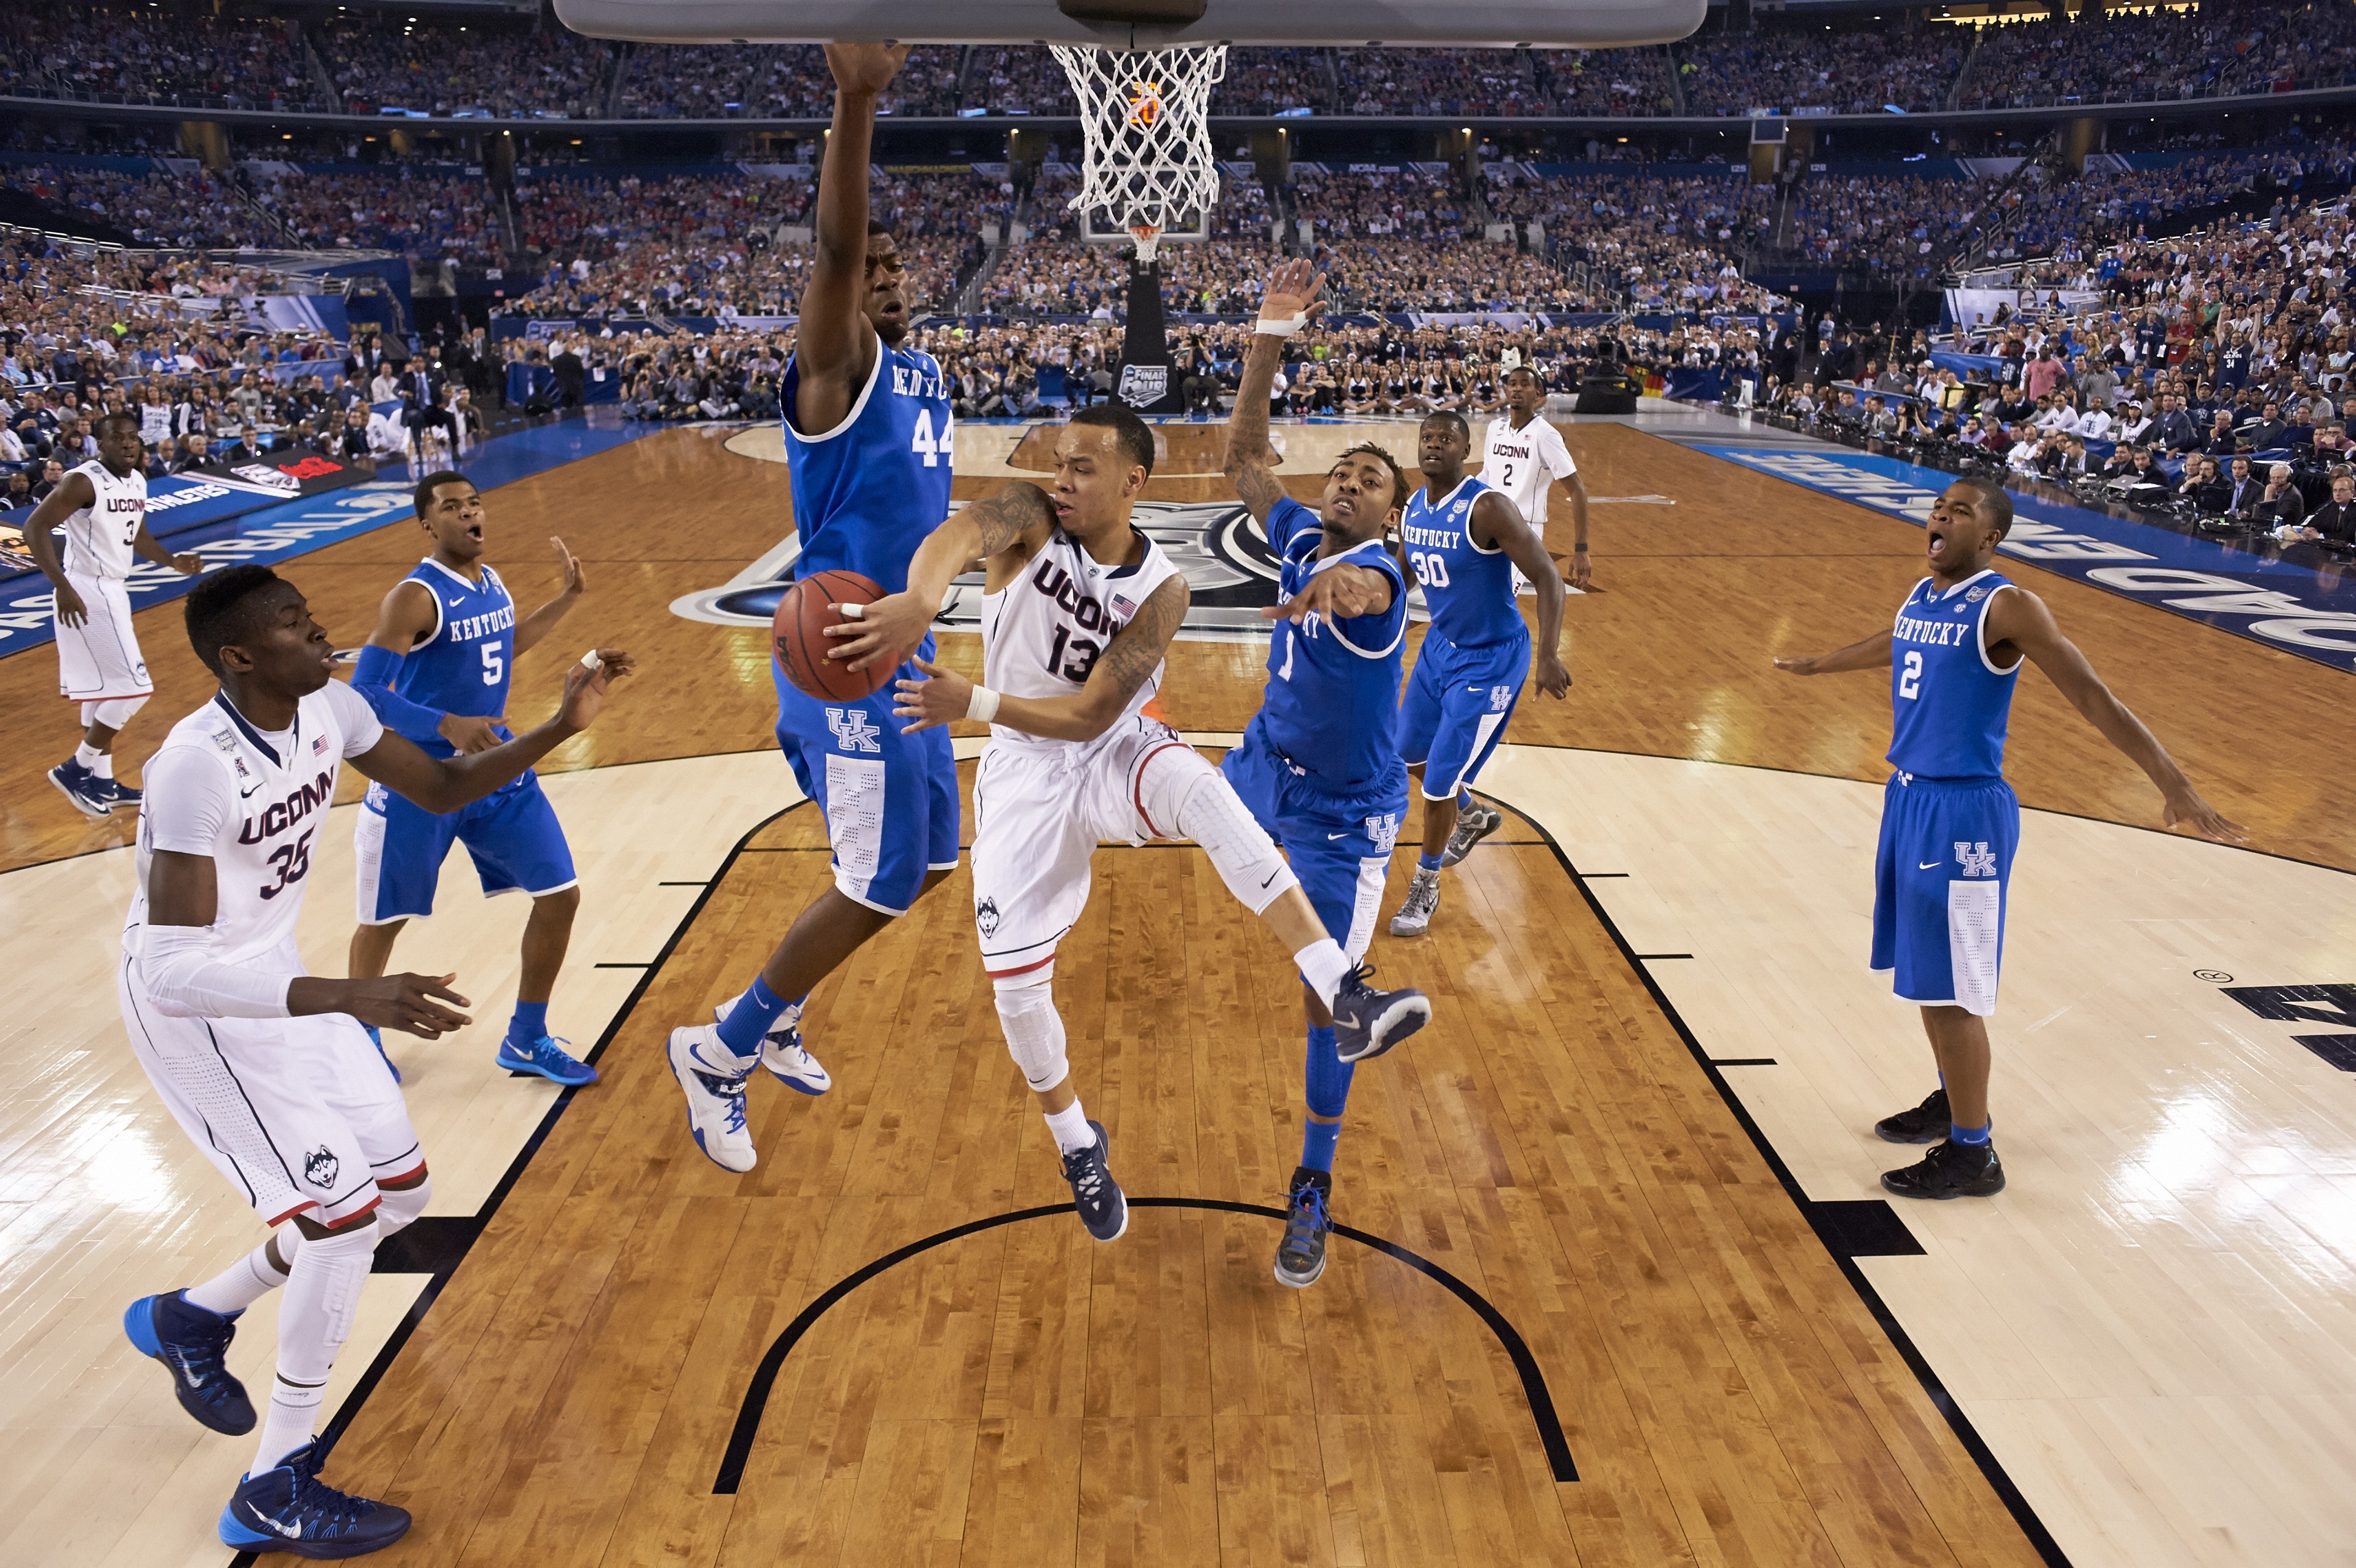 College Basketball: NCAA Final Four: UConn Shabazz Napier (13) in action, pass vs Kentucky Dakari Johnson (44) at AT&T Stadium. Arlington, TX 4/7/2014 CREDIT: Greg Nelson (Photo by Greg Nelson /Sports Illustrated/Getty Images) (Set Number: X158058 TK1 R7 F121 )